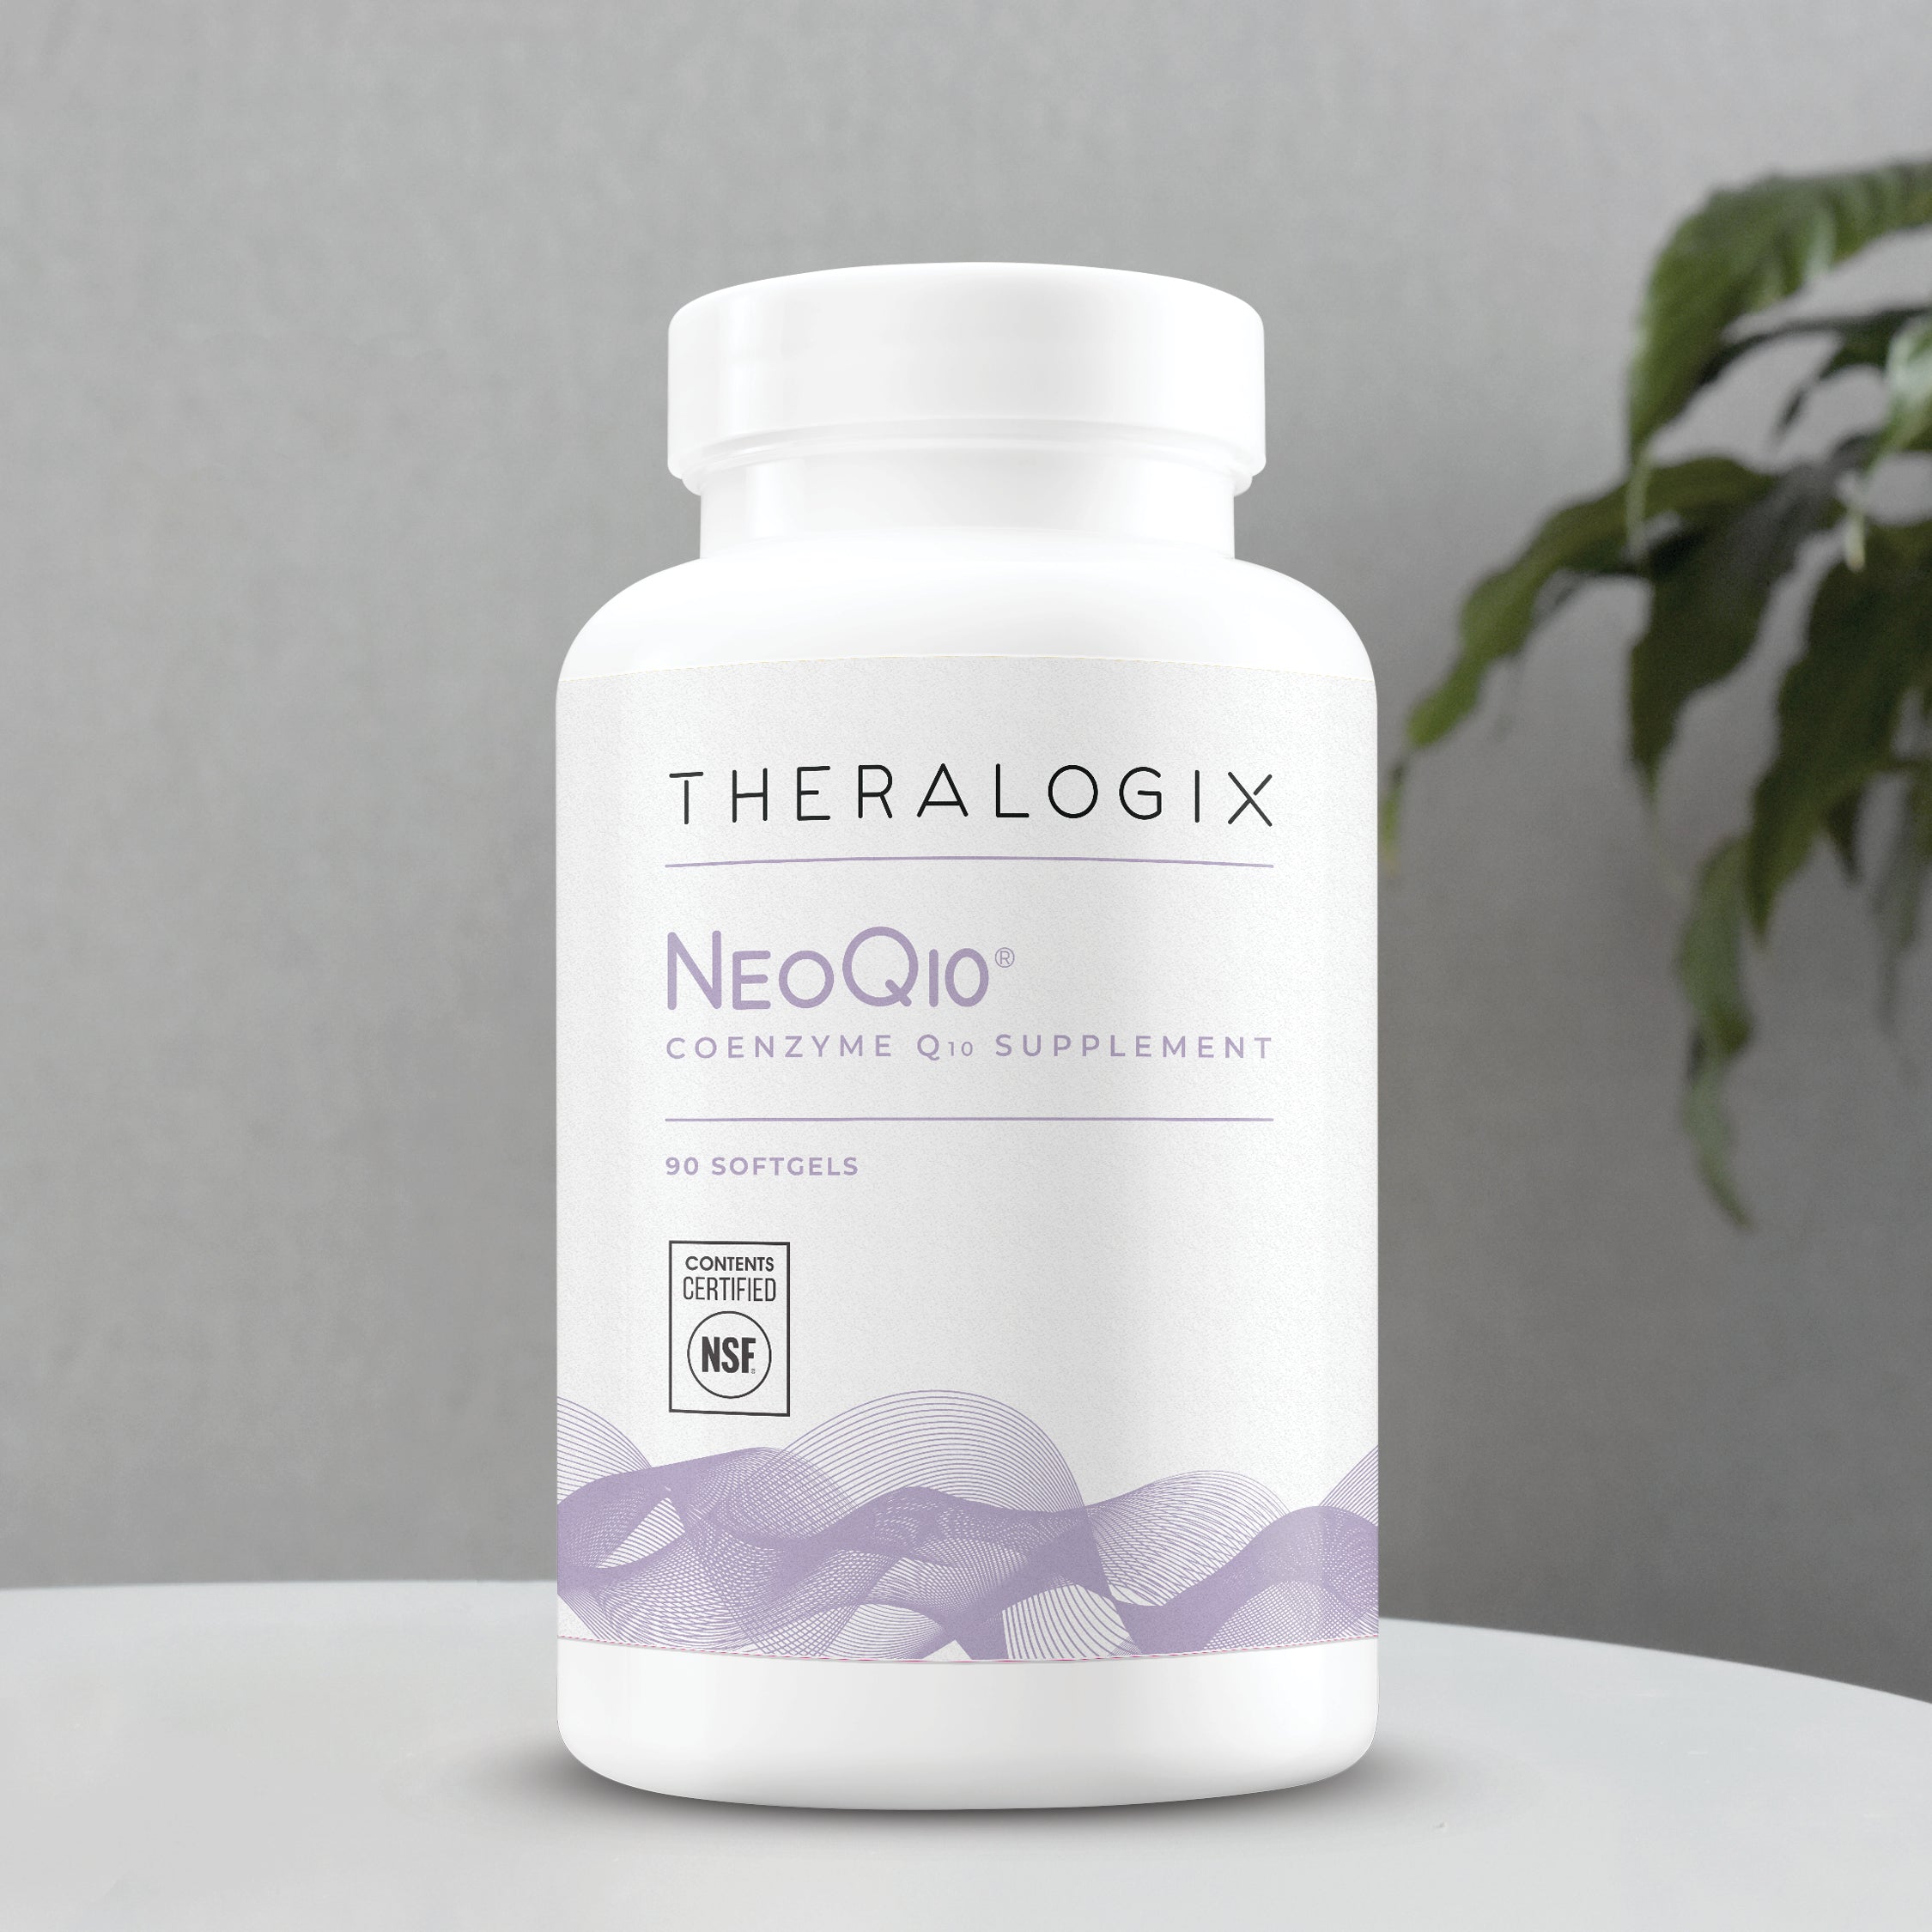 NeoQ₁₀® Coenzyme Q₁₀ Supplement | Theralogix